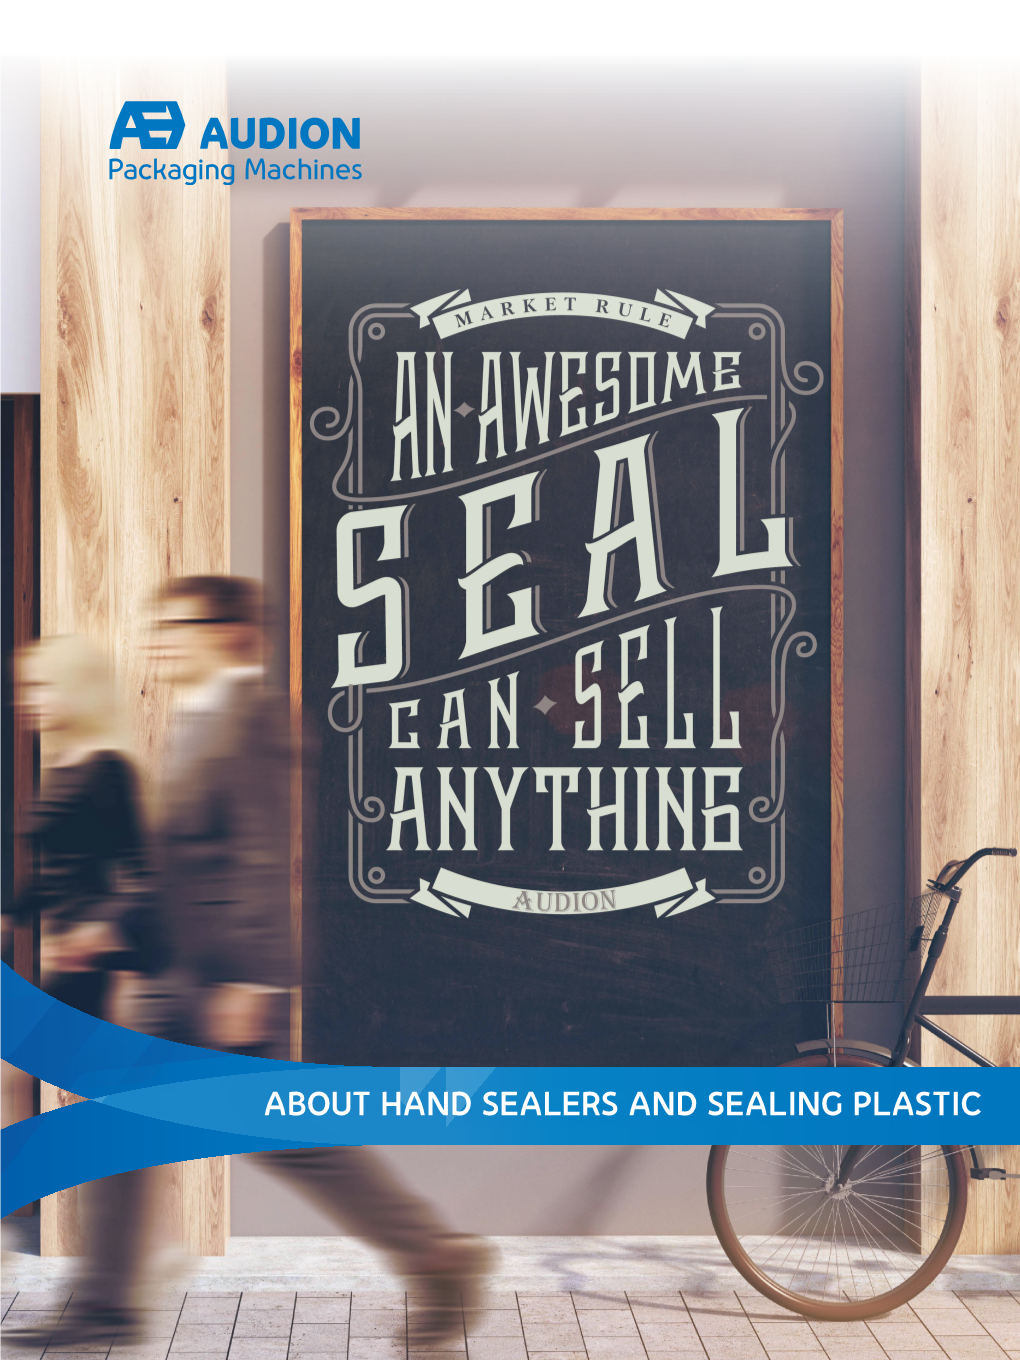 About Hand Sealers and Sealing Plastic How Does Sealing a Packaging Work?